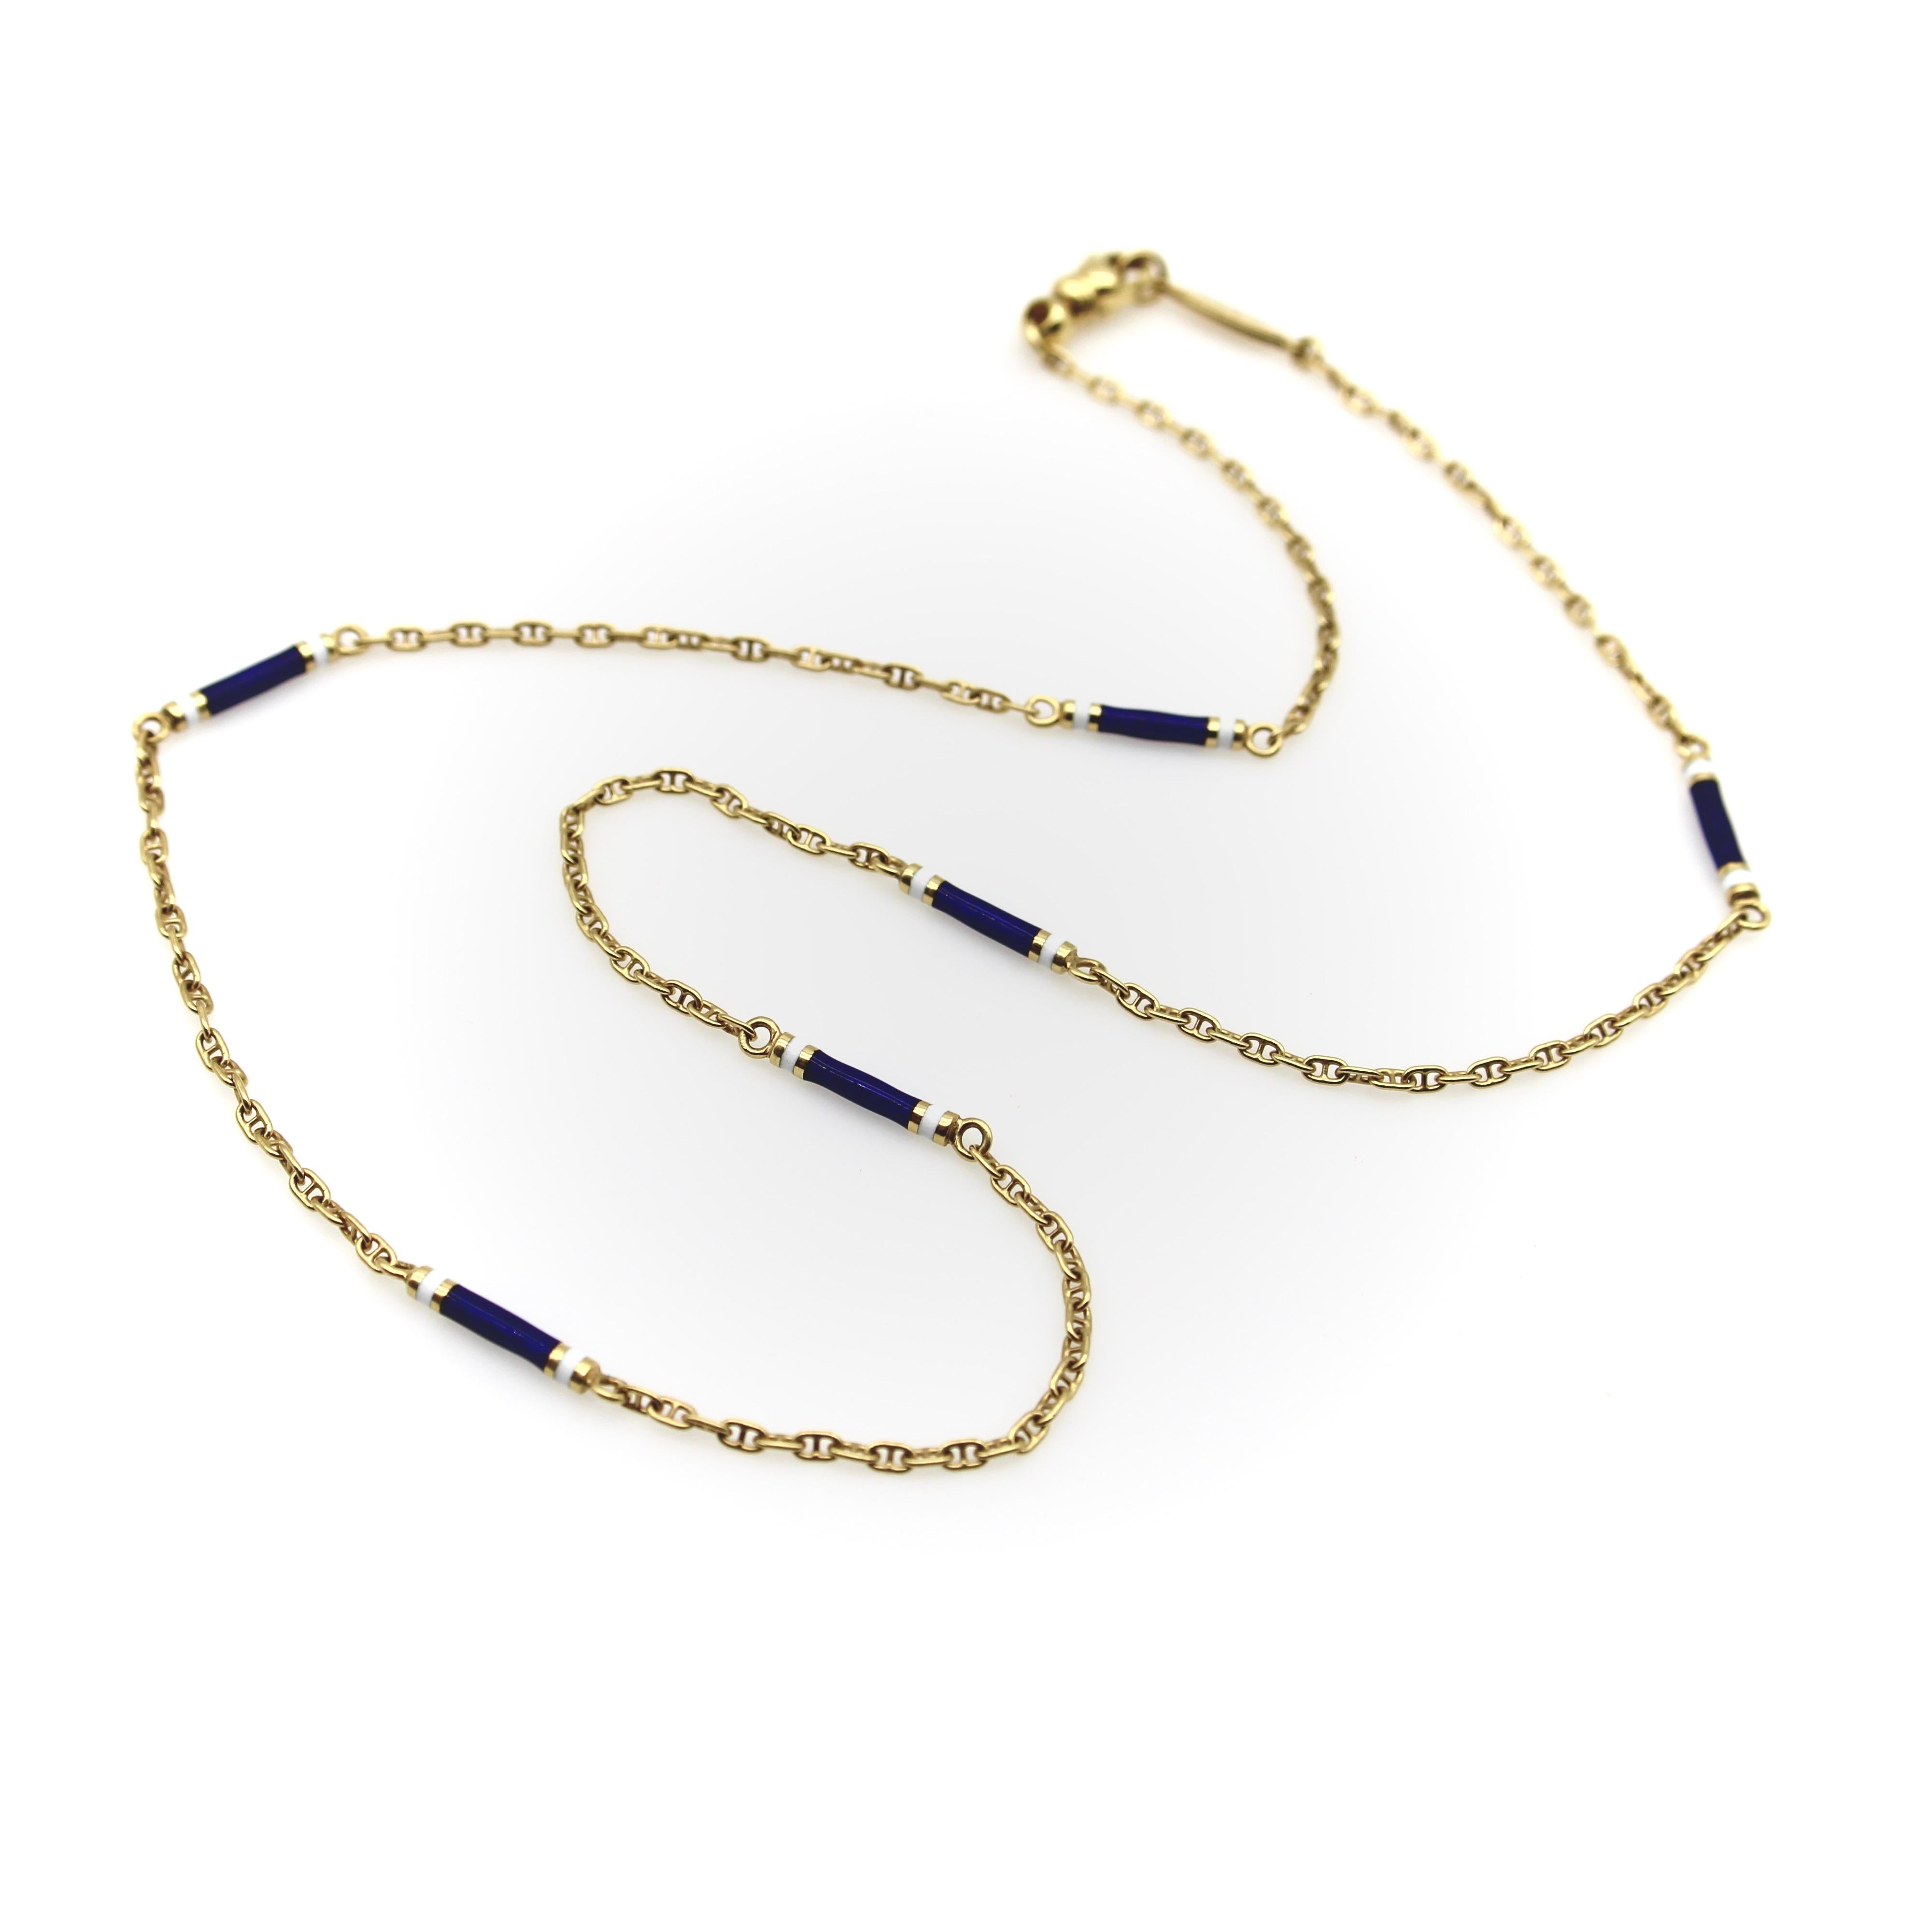 This handmade 18k gold mariners link chain was designed by VICTOR MAYER for Fabergé. It features stations of cobalt blue enamel, transparent to reveal the guilloche engravings underneath, and opaque white enamel sandwiched between gold details. The